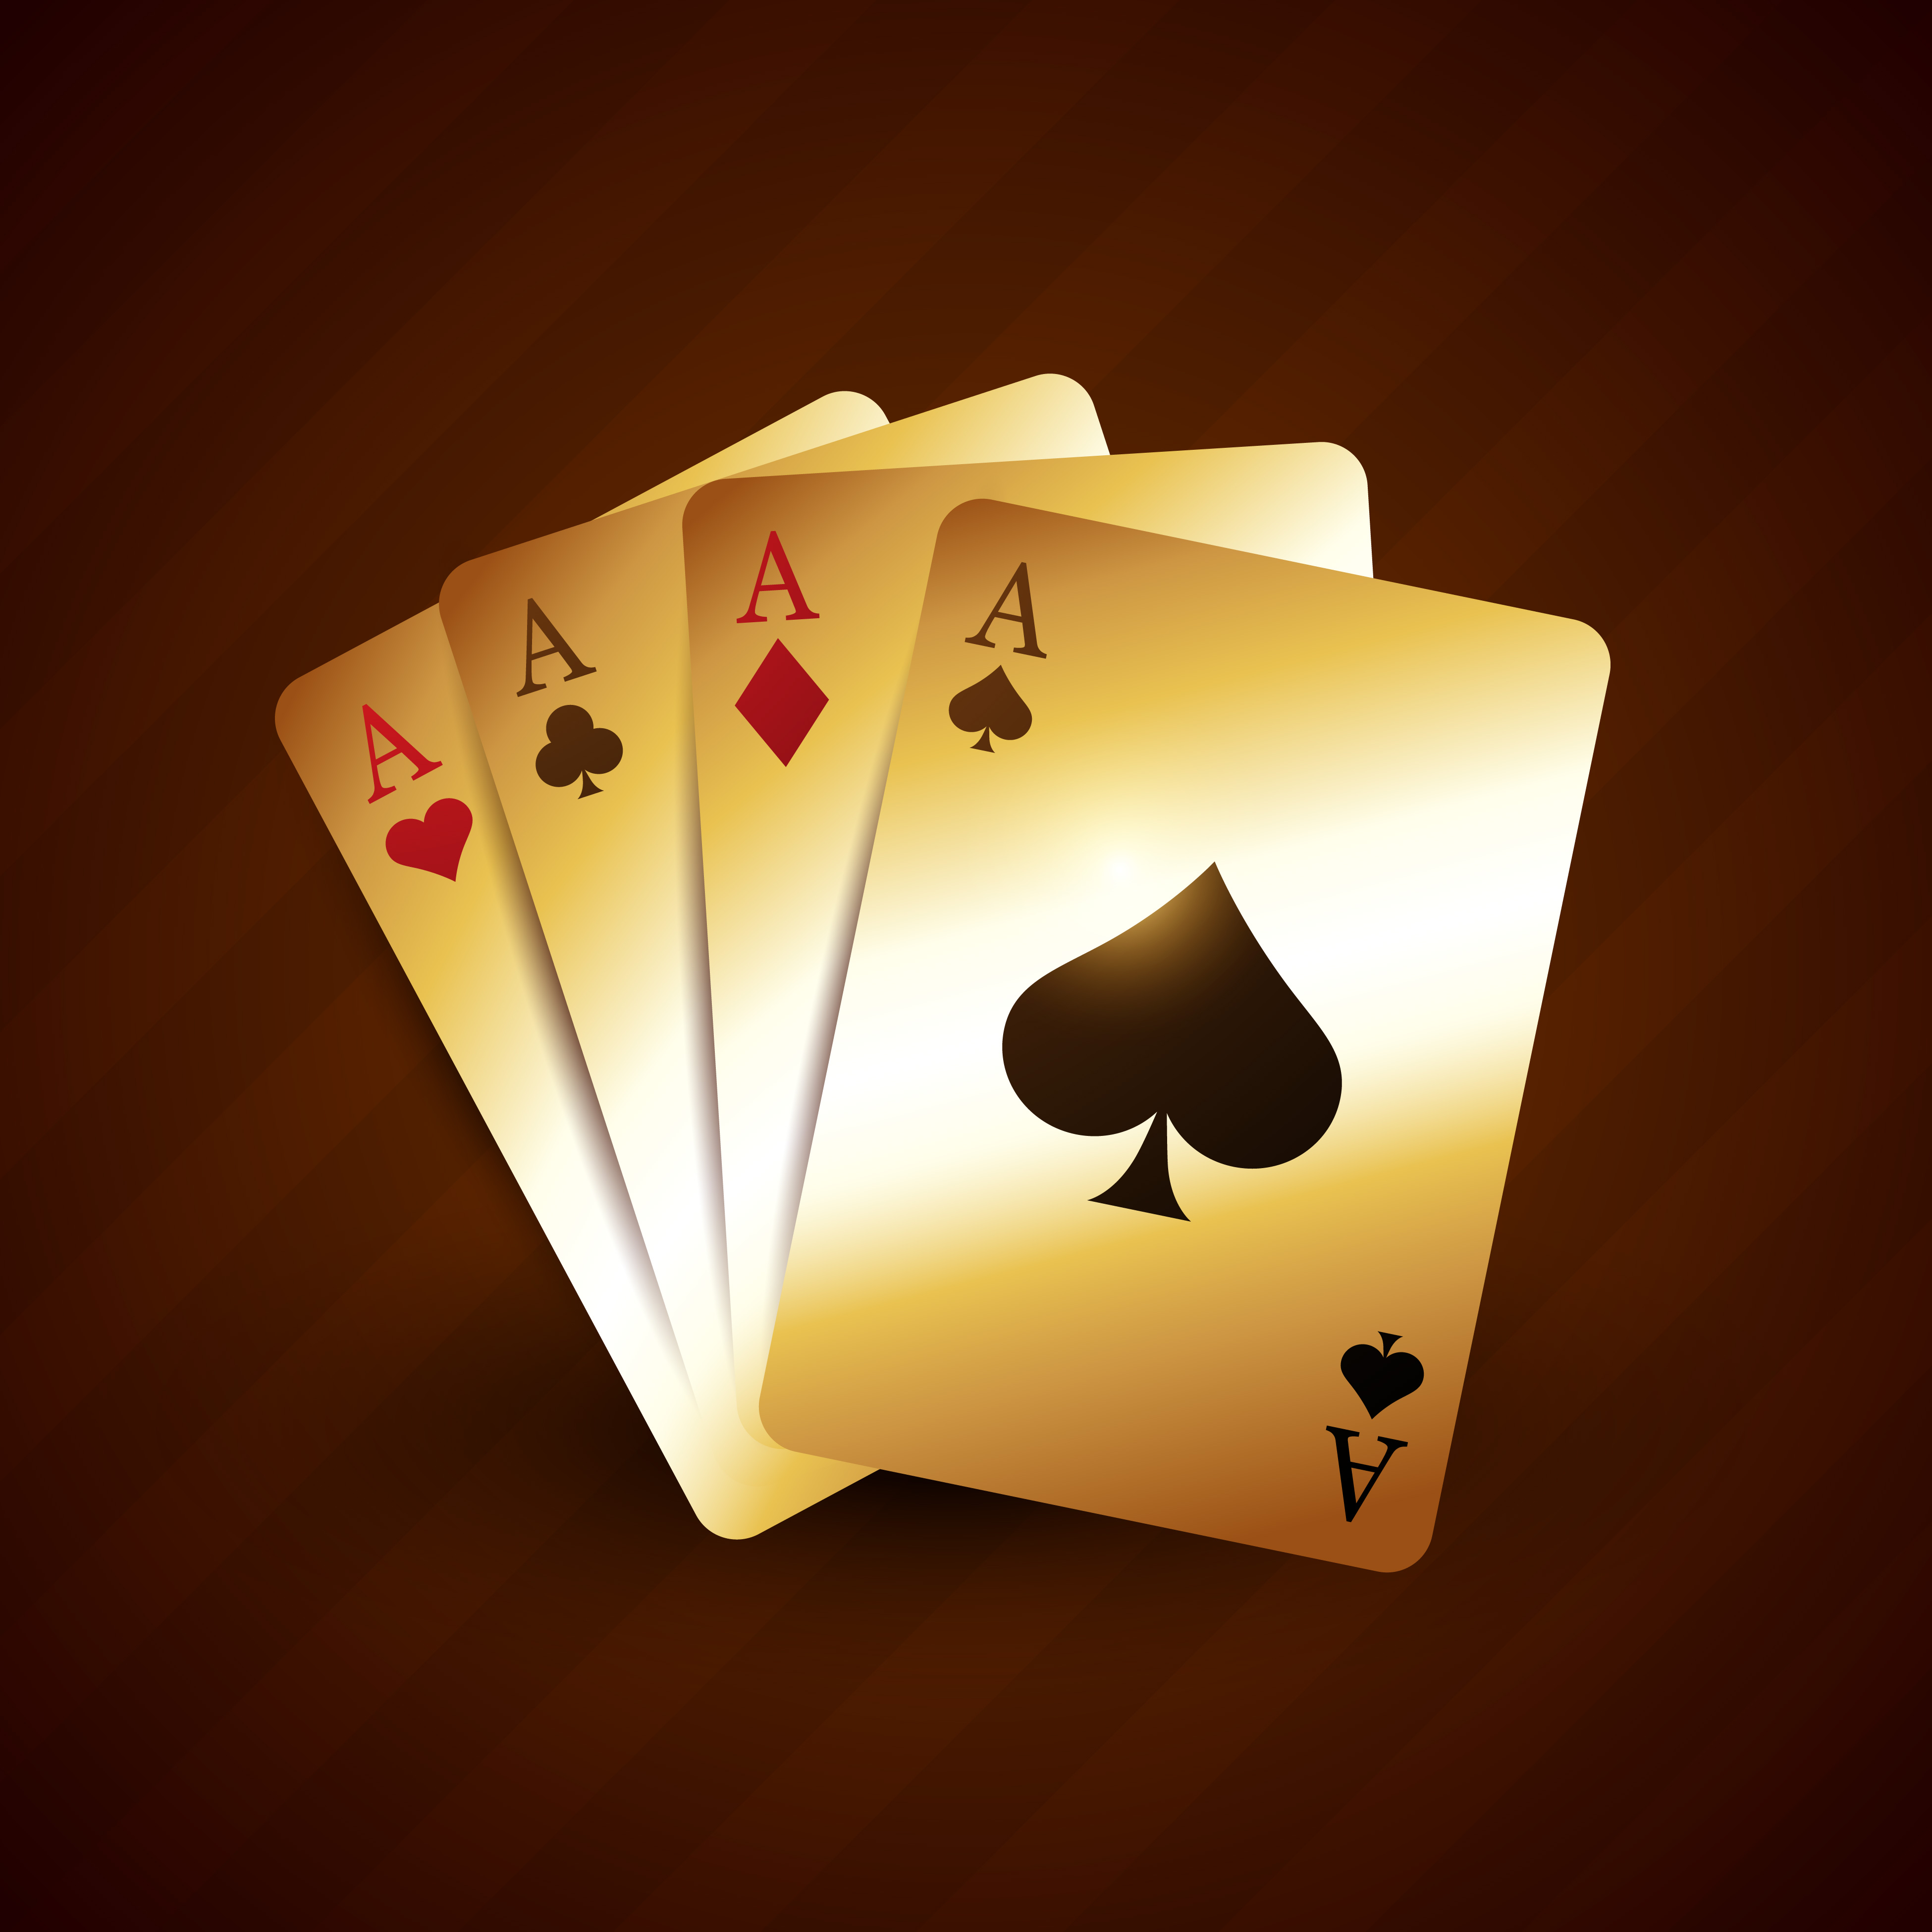 golden casino playing card with four aces - Download Free Vectors